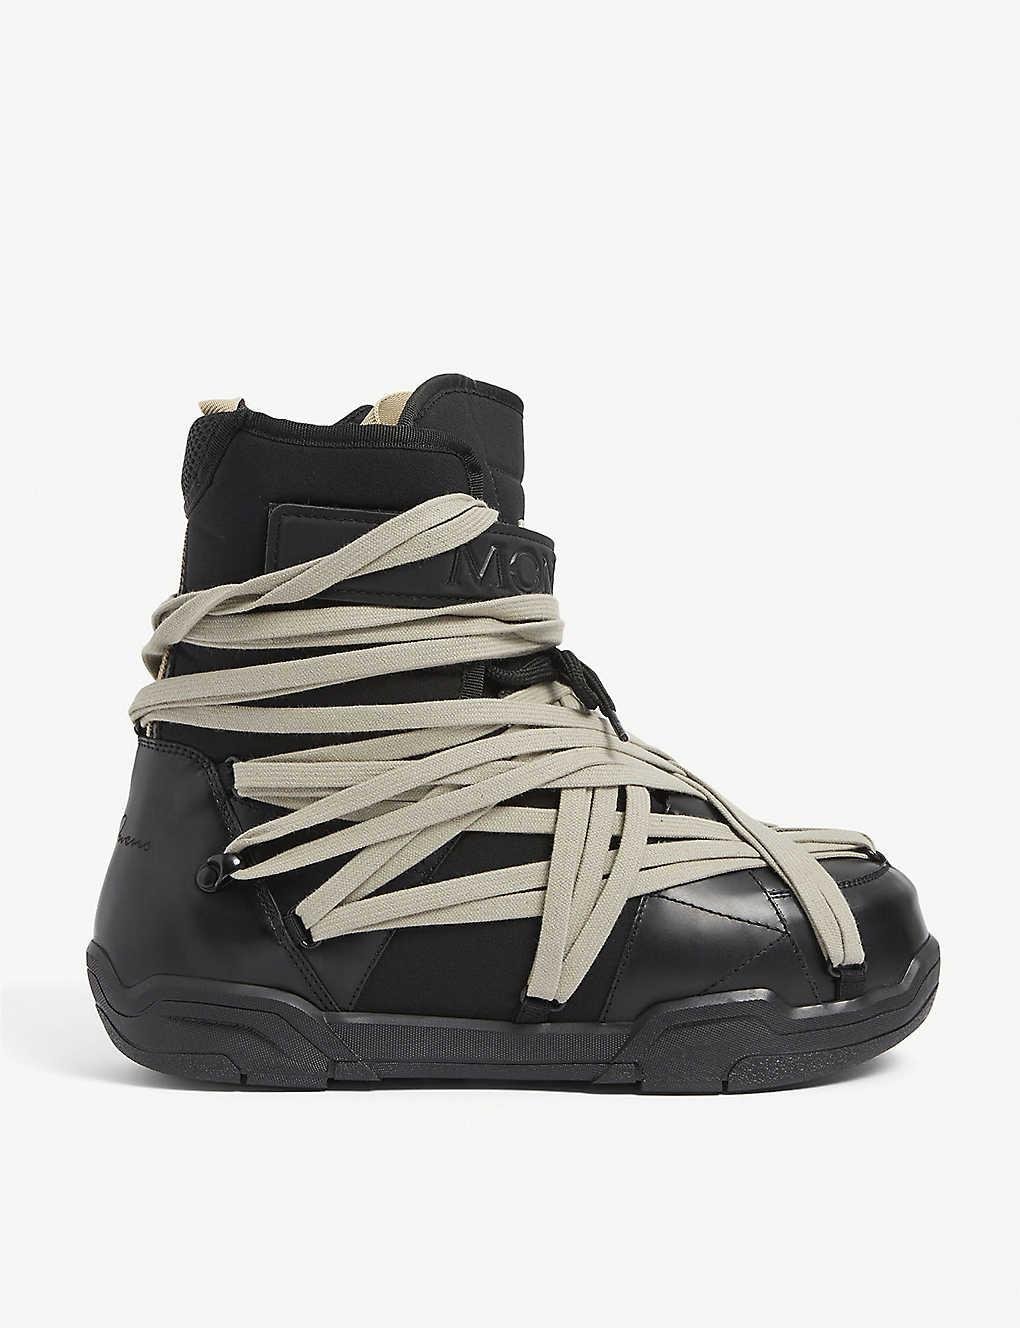 Rick Owens Moncler + Amber Leather Snow Boots in Black for Men | Lyst